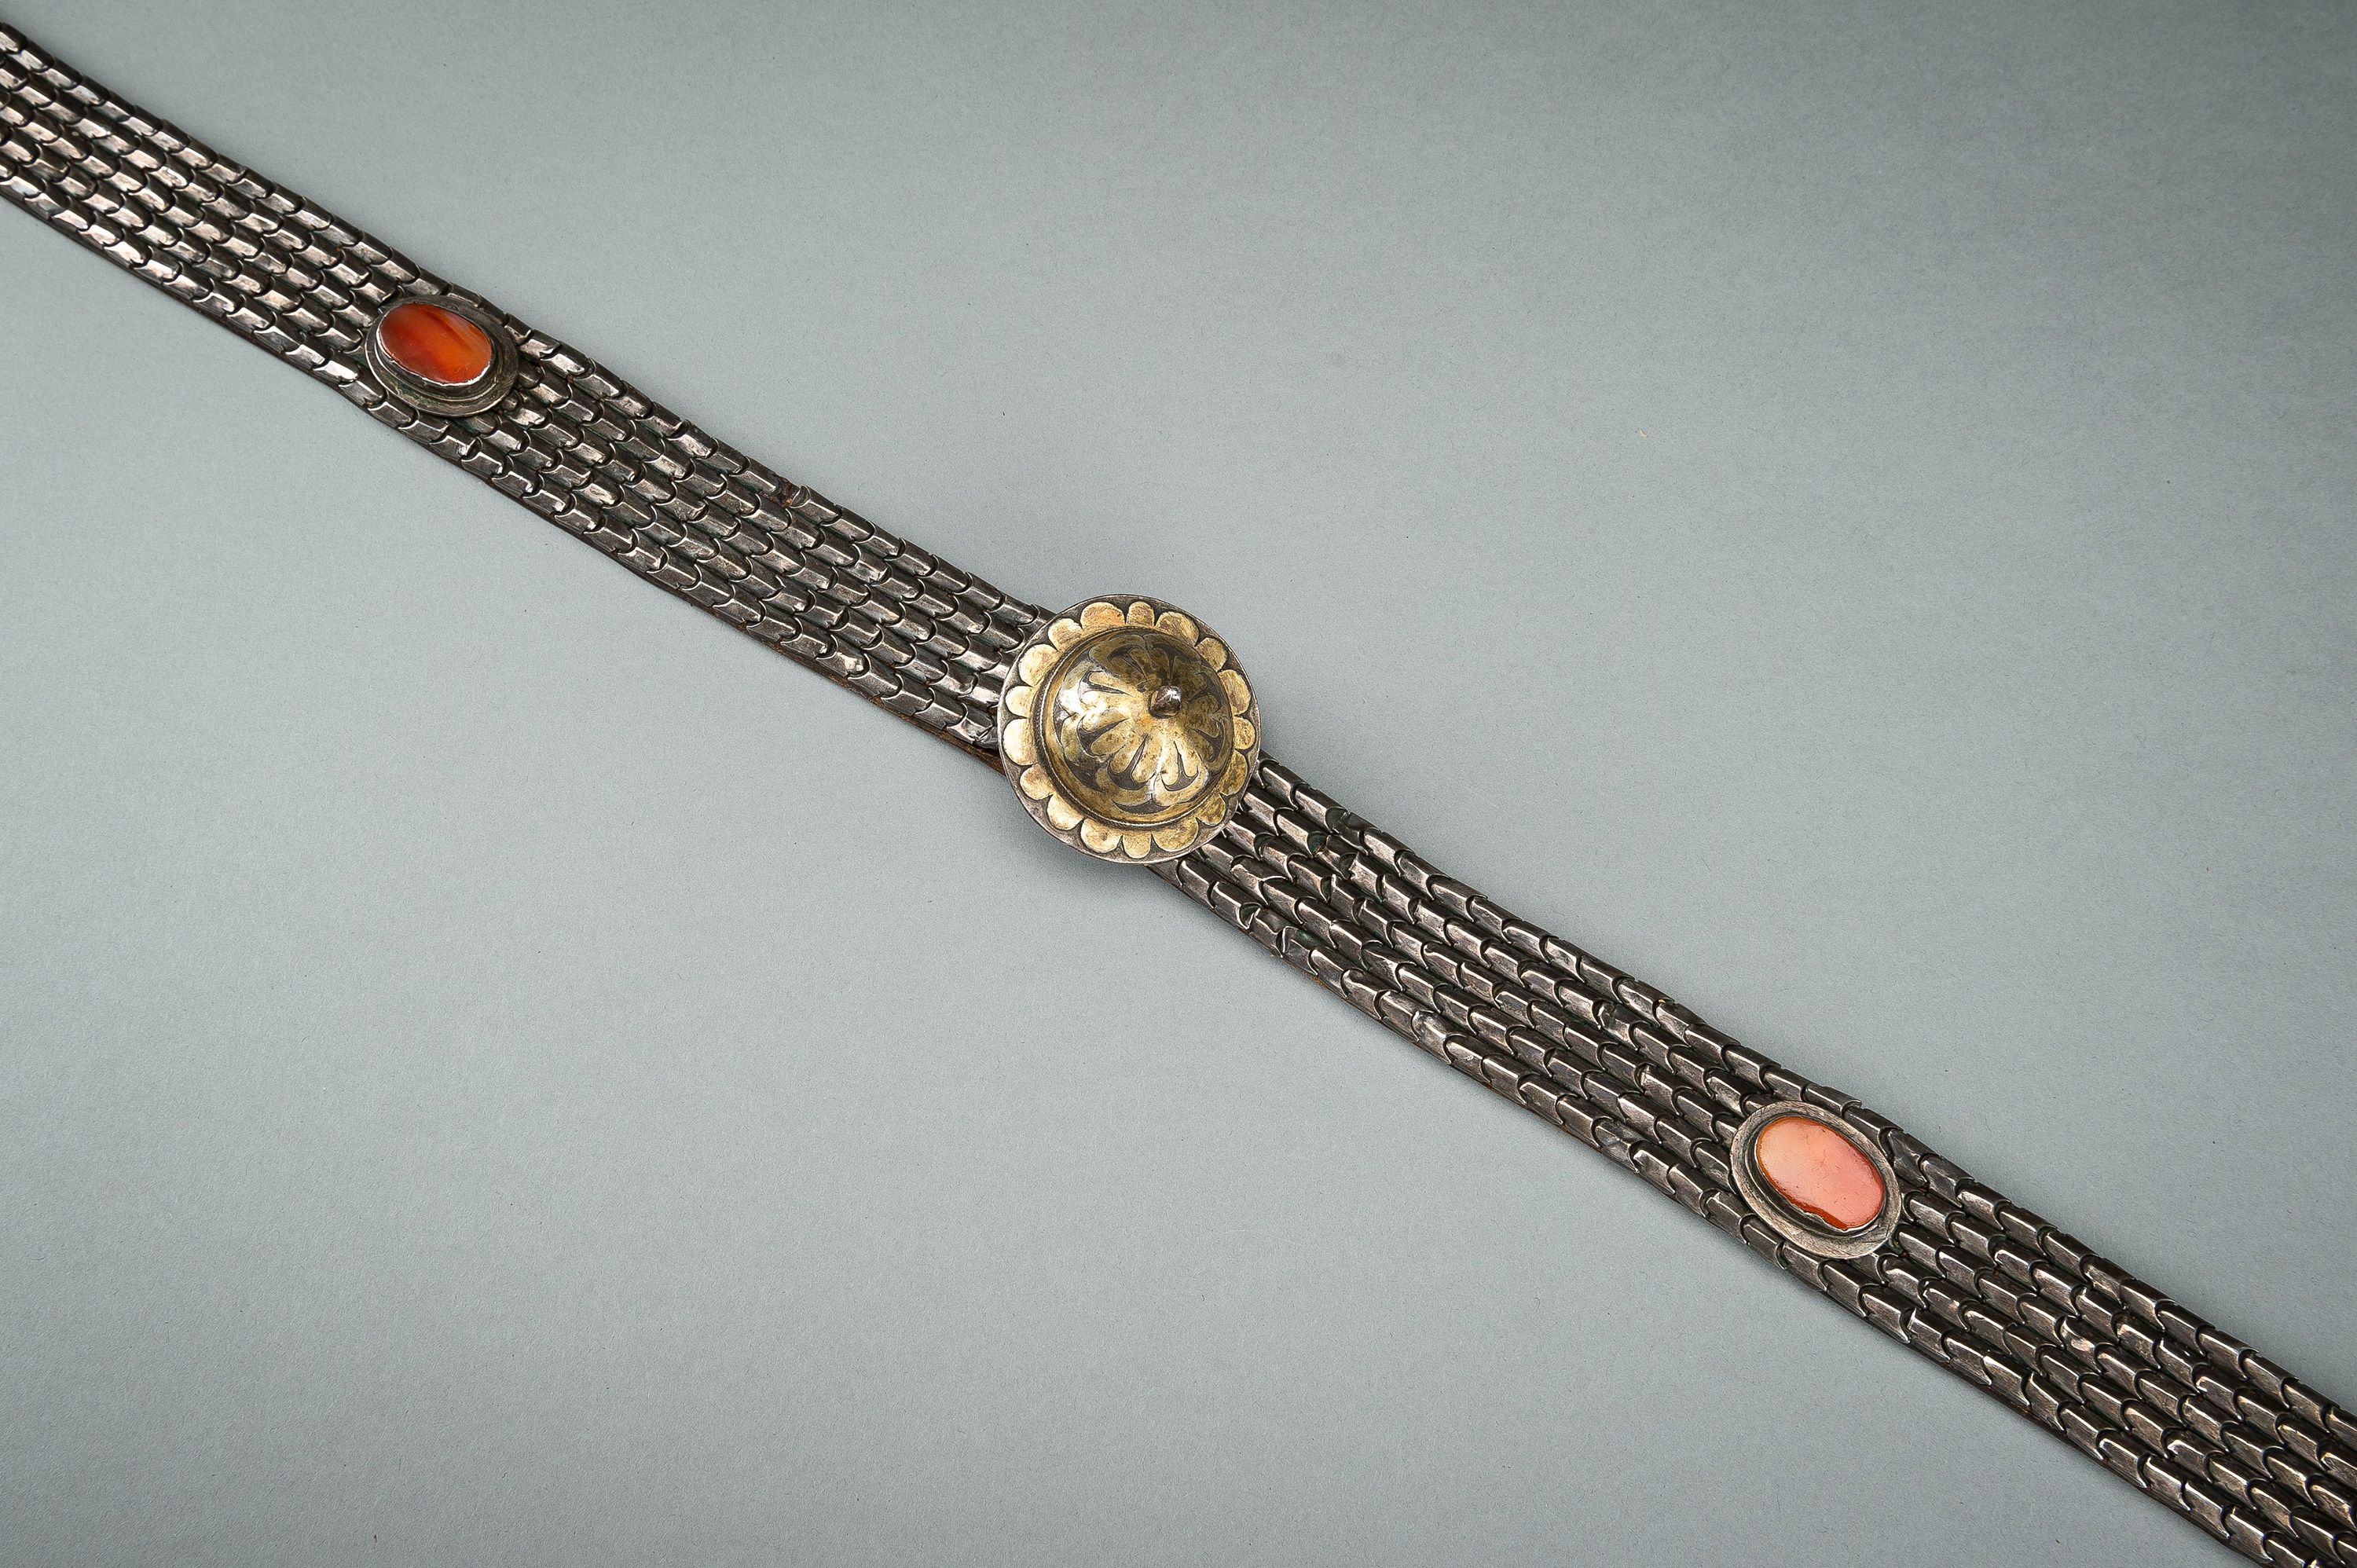 AN OTTOMAN LEATHER BELT SET WITH CARNELIANS AND SILVER